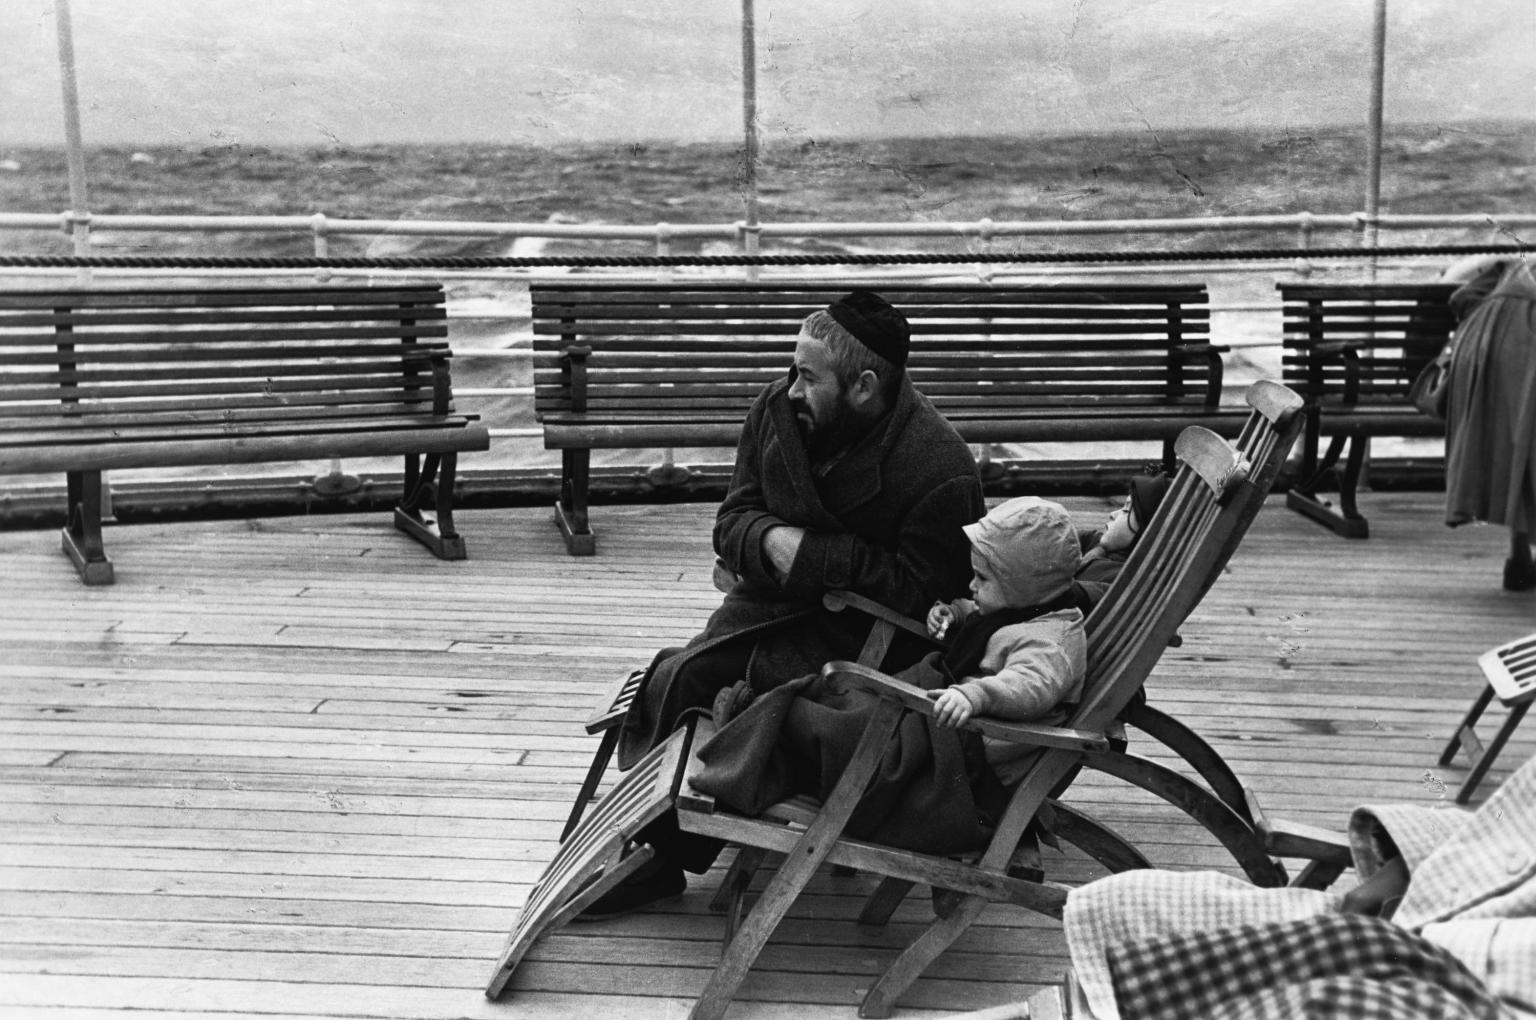 Photograph of man in a skullcap kneeling next to a child sitting in a wooden chair on boat deck, gazing into the distance to the left of the viewer.